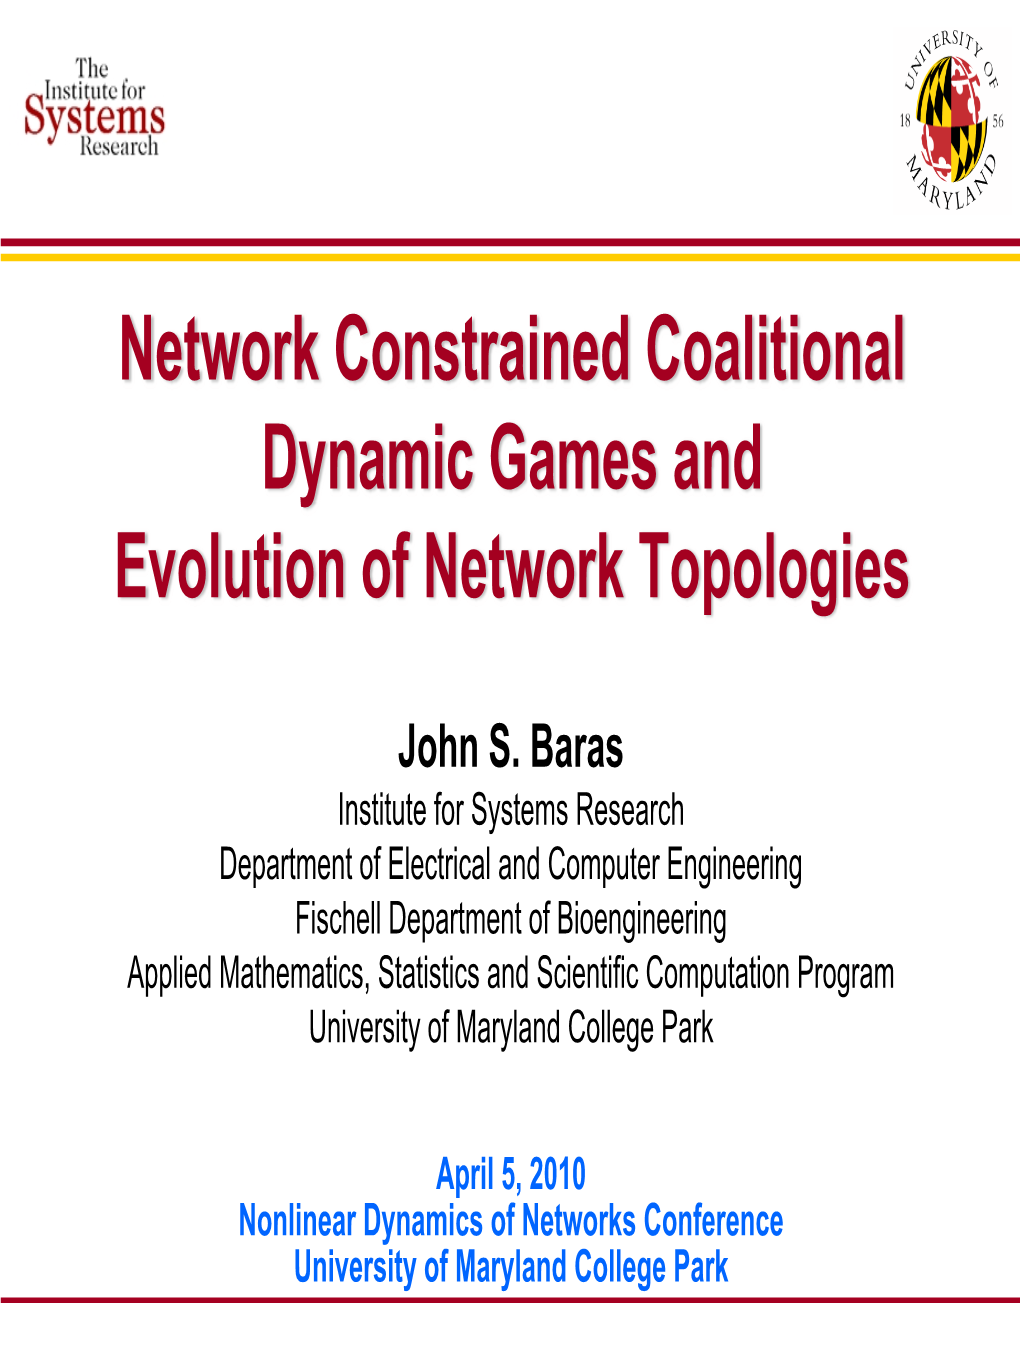 Network Constrained Coalitional Dynamic Games and Evolution of Network Topologies